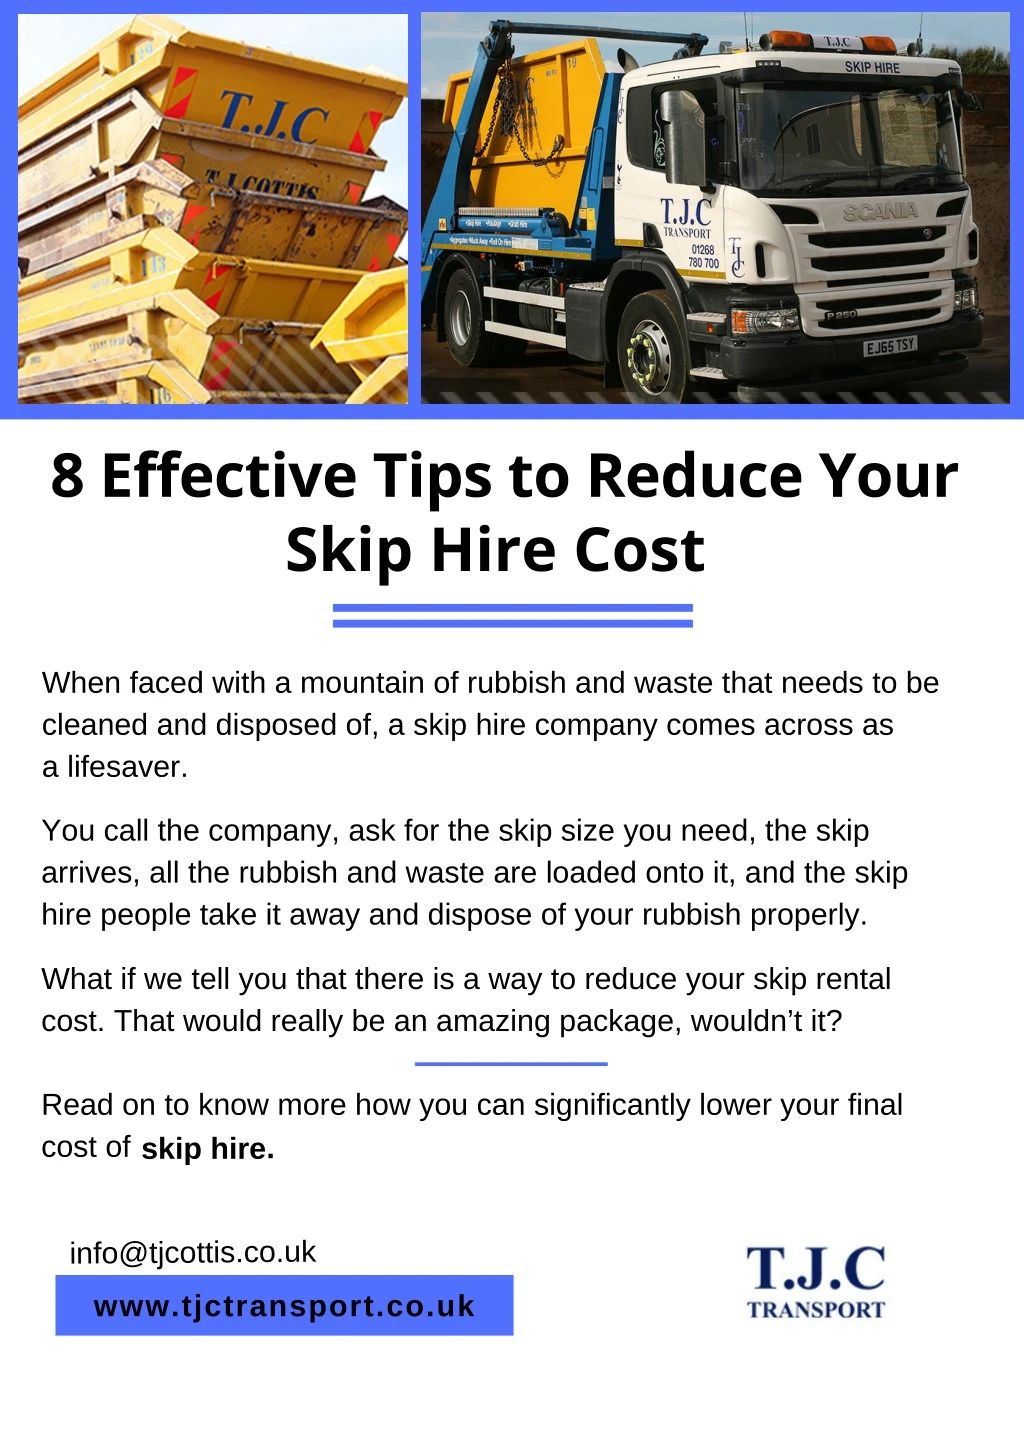 8 effective tips to reduce your skip hire cost